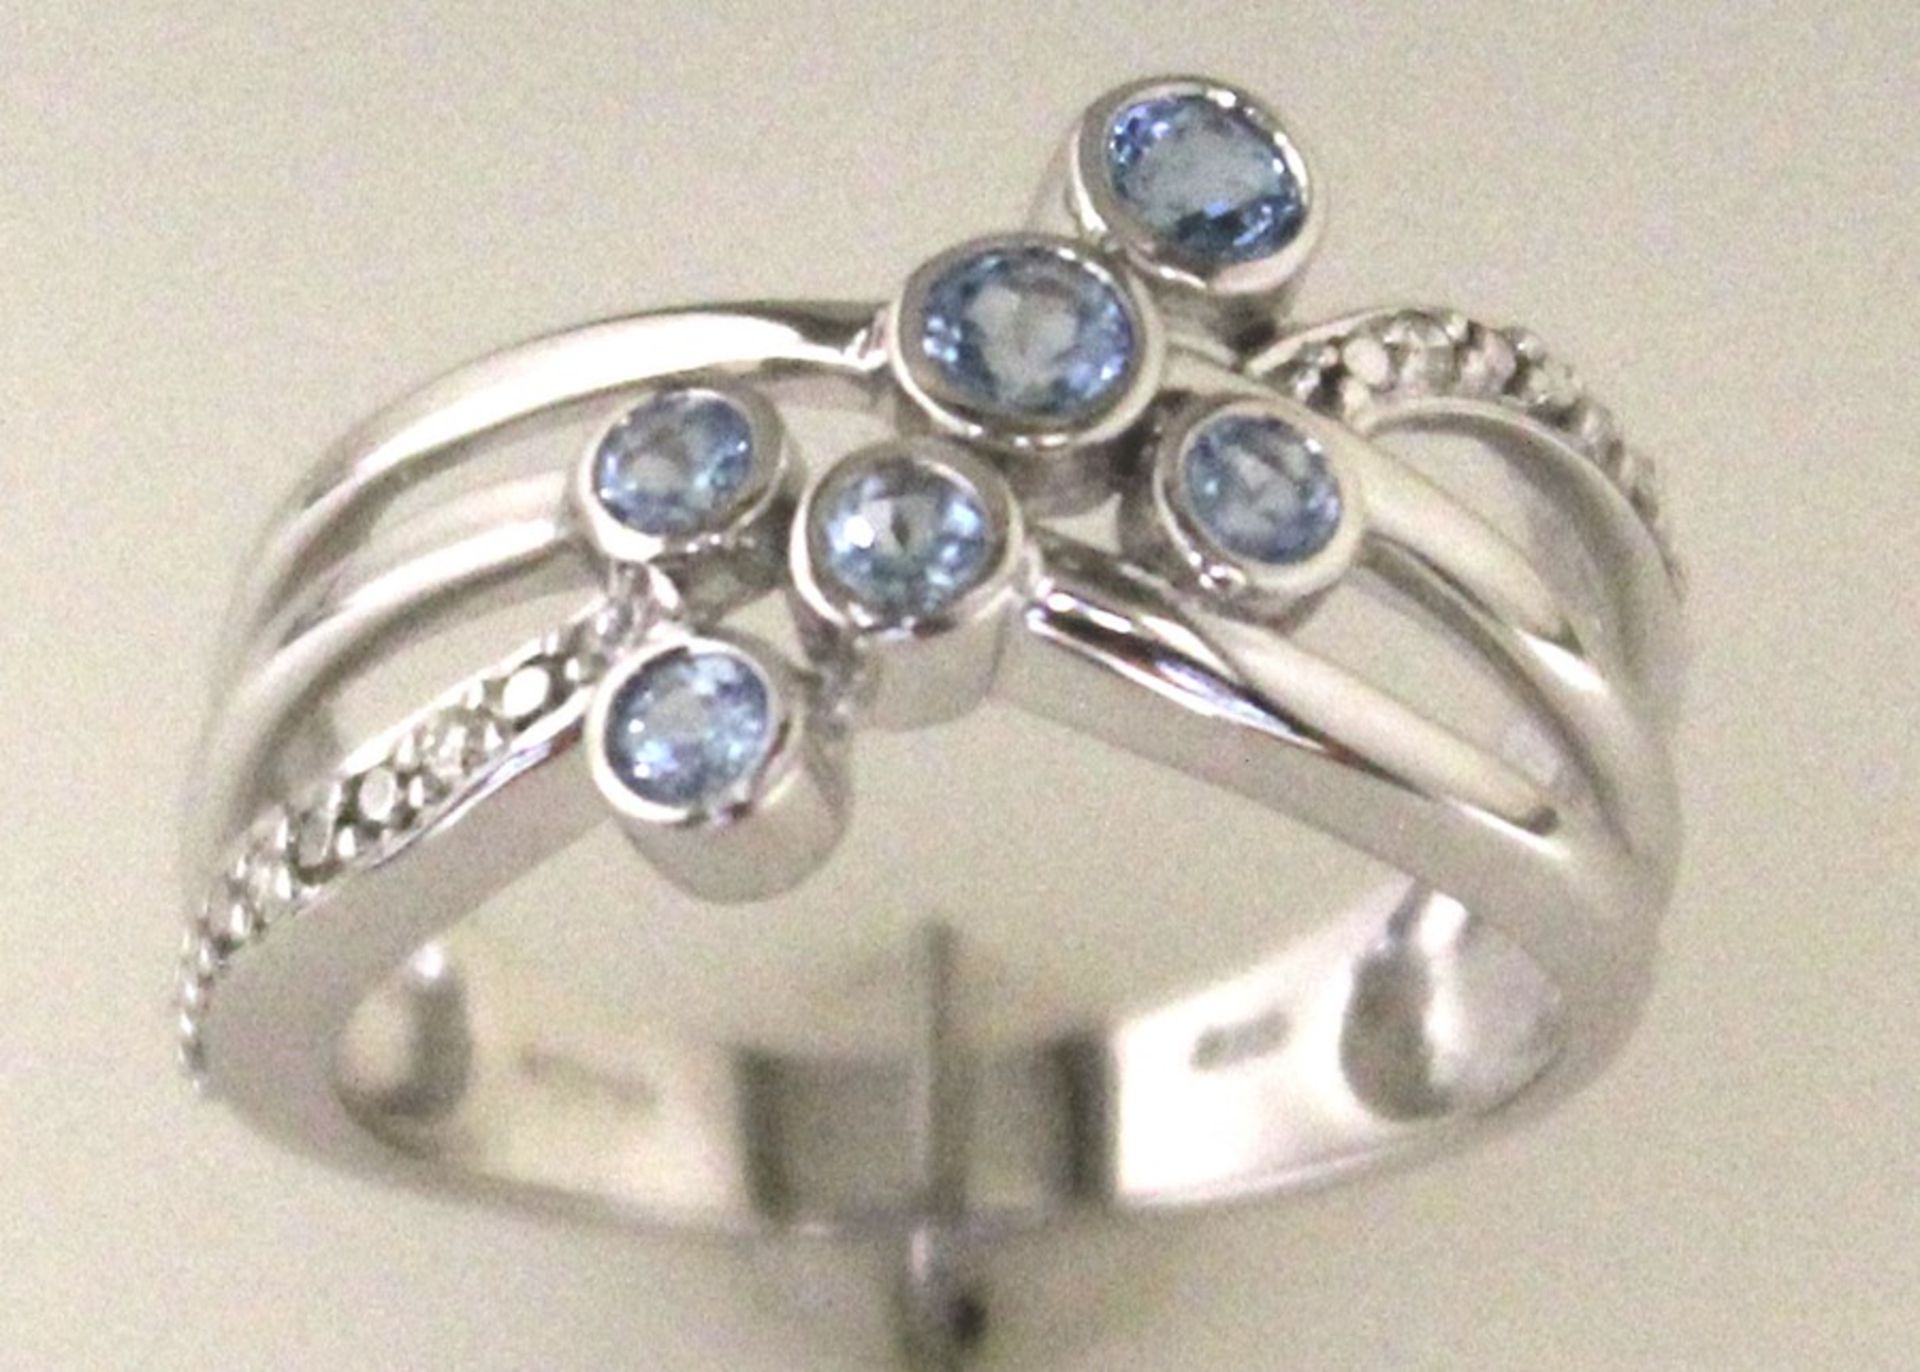 Valued by GIE £905.00 - 9ct White Gold Fancy Cluster Diamond Blue Topaz Ring 0.10 Carats - 8180046L, - Image 5 of 6